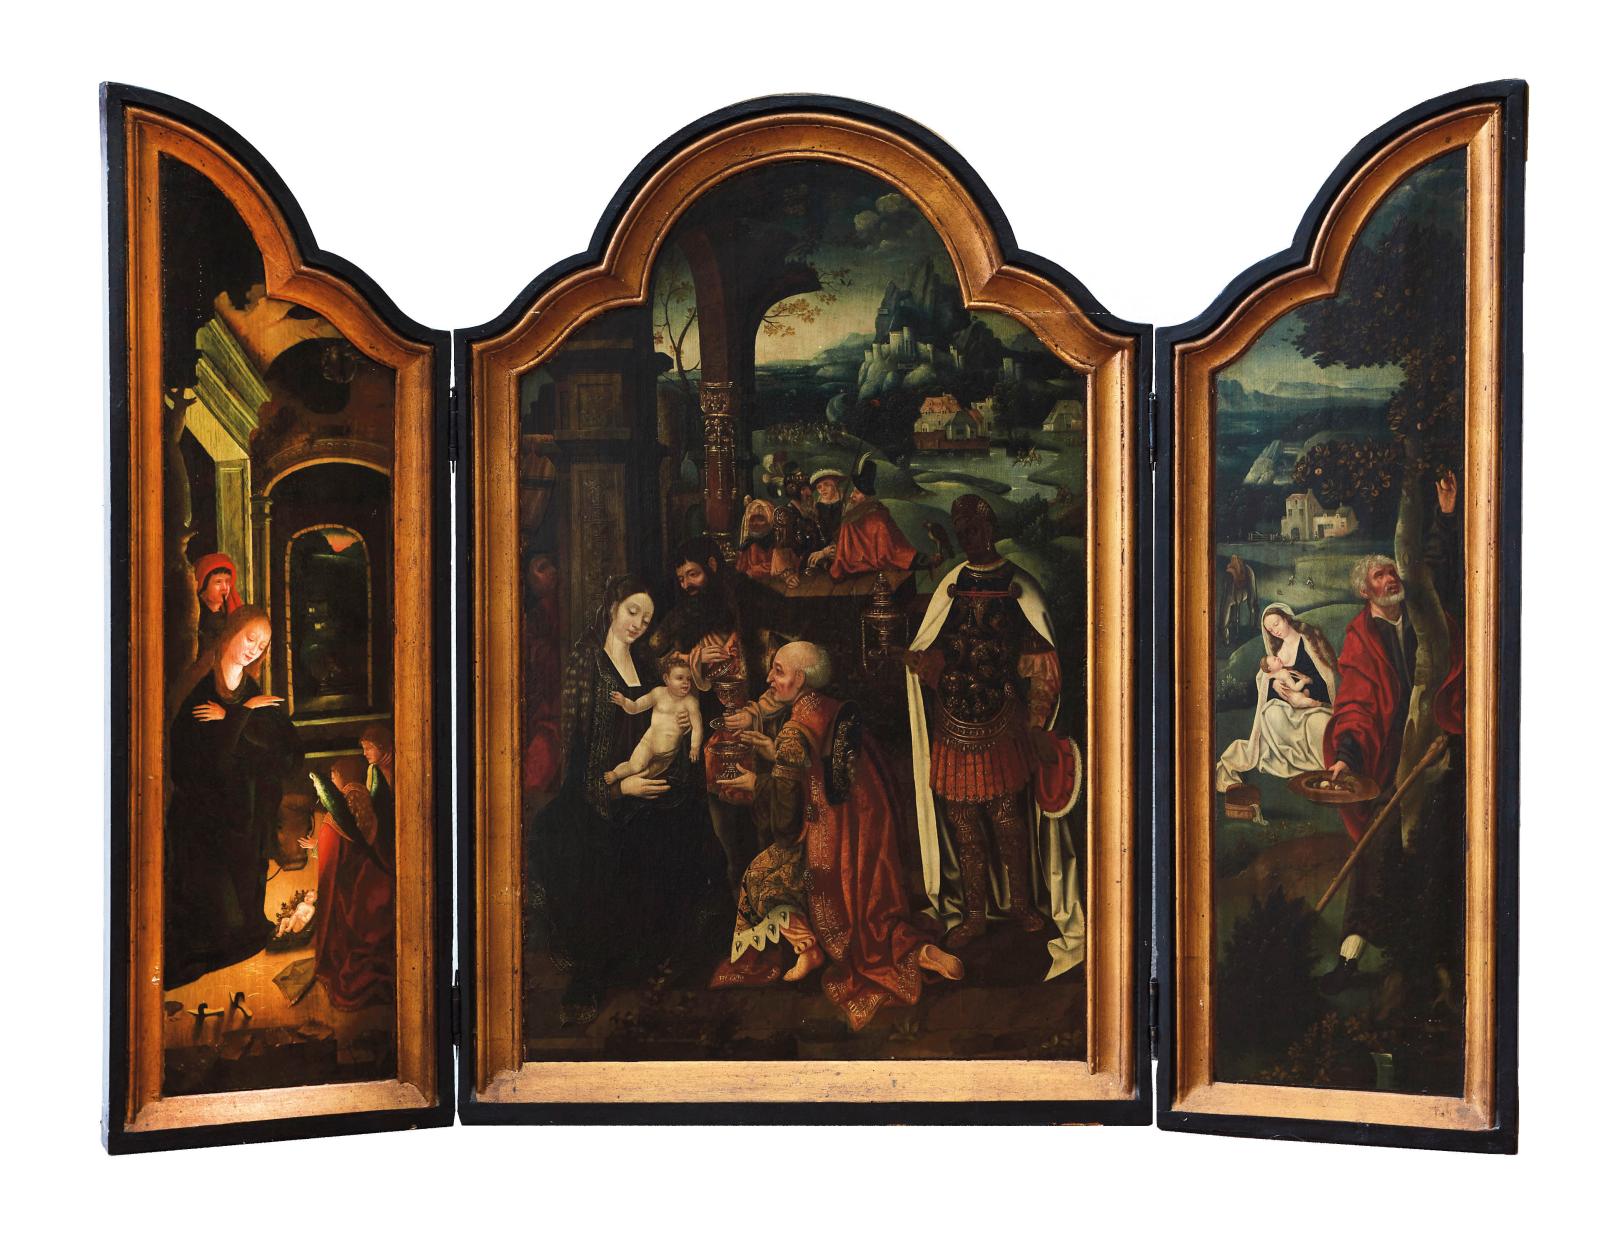 The Adoration of the Magi, a Prominent 16th-Century Theme